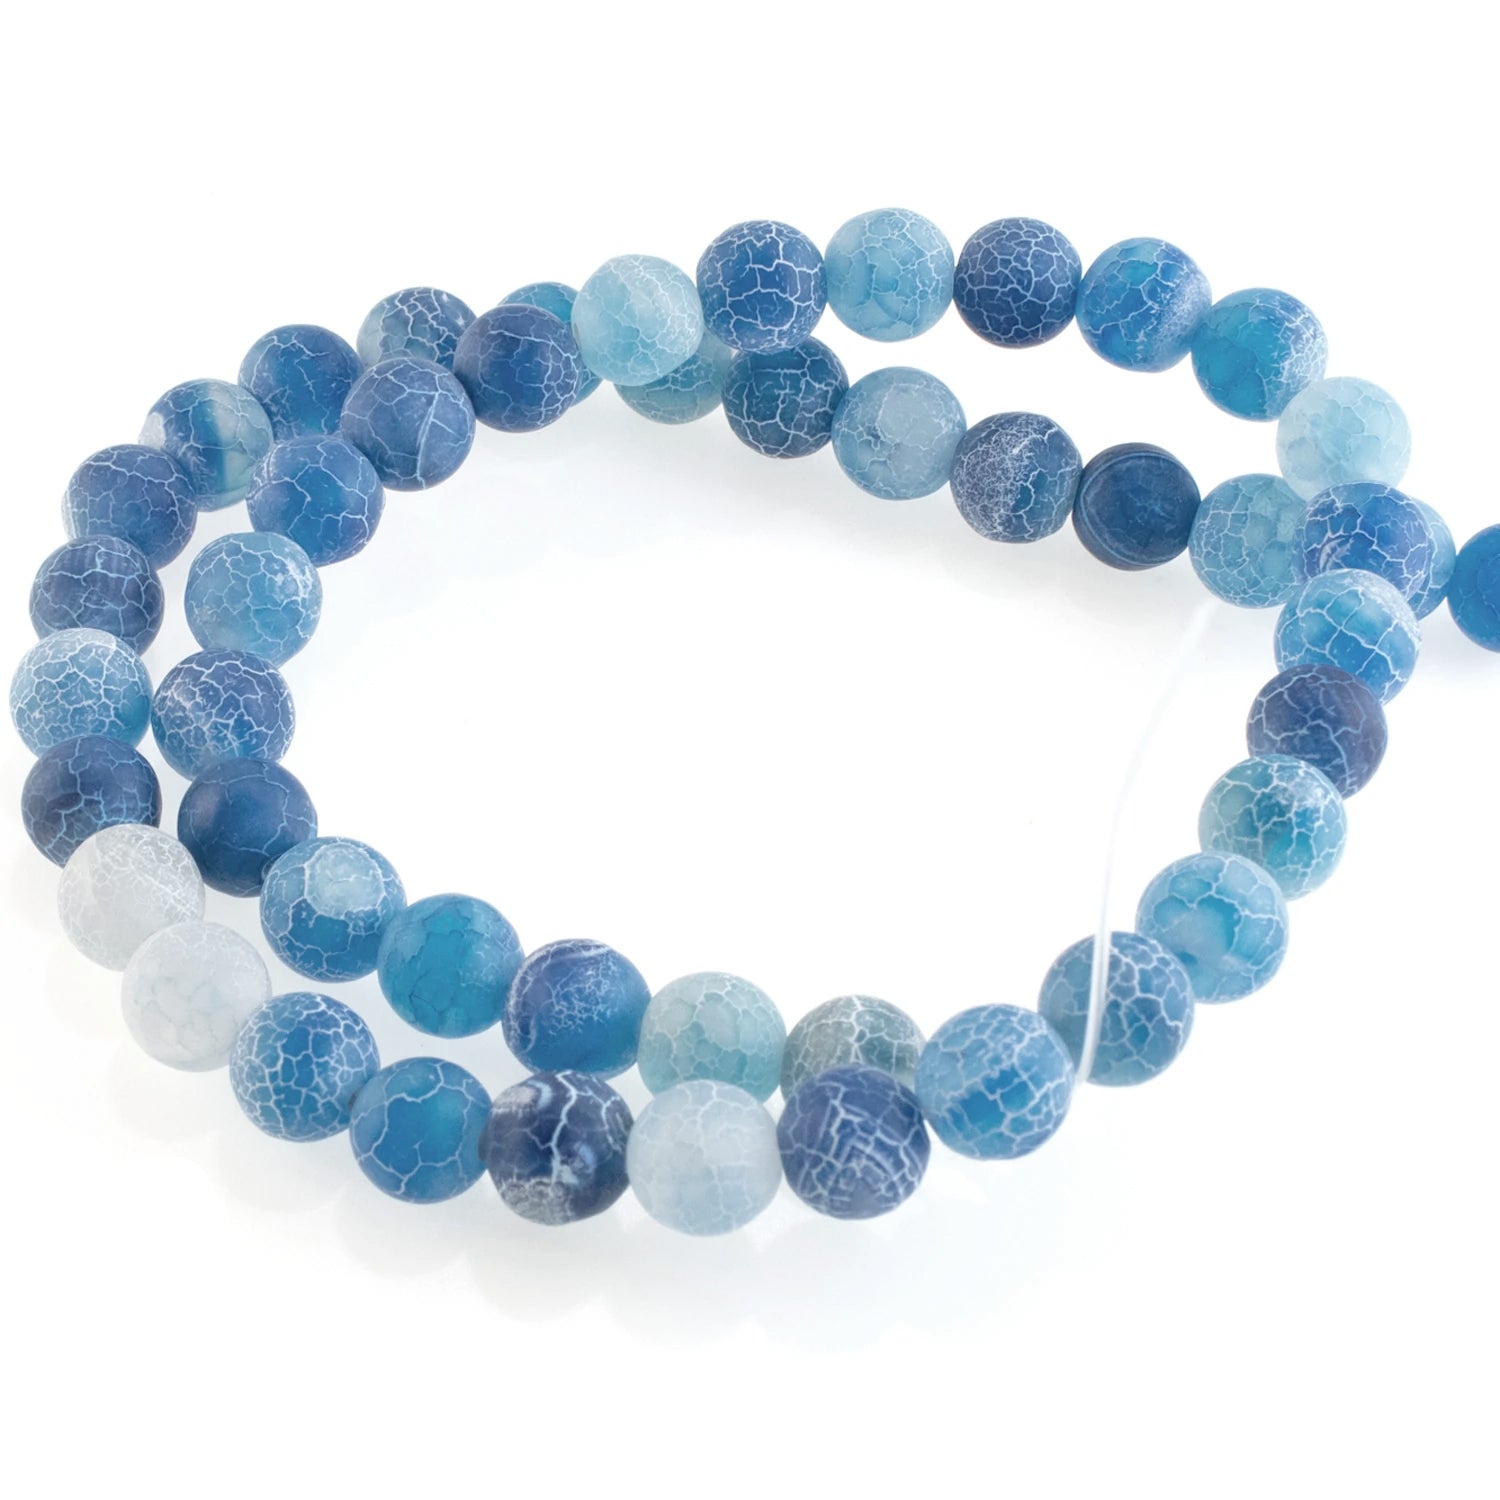 Comkrivy 150 pcs 8mm Natural Blue Vein Agate Beads Gemstone Beads for  Jewelry Making Necklace Making, Beautiful Patterns Marble Beads for  Bracelets